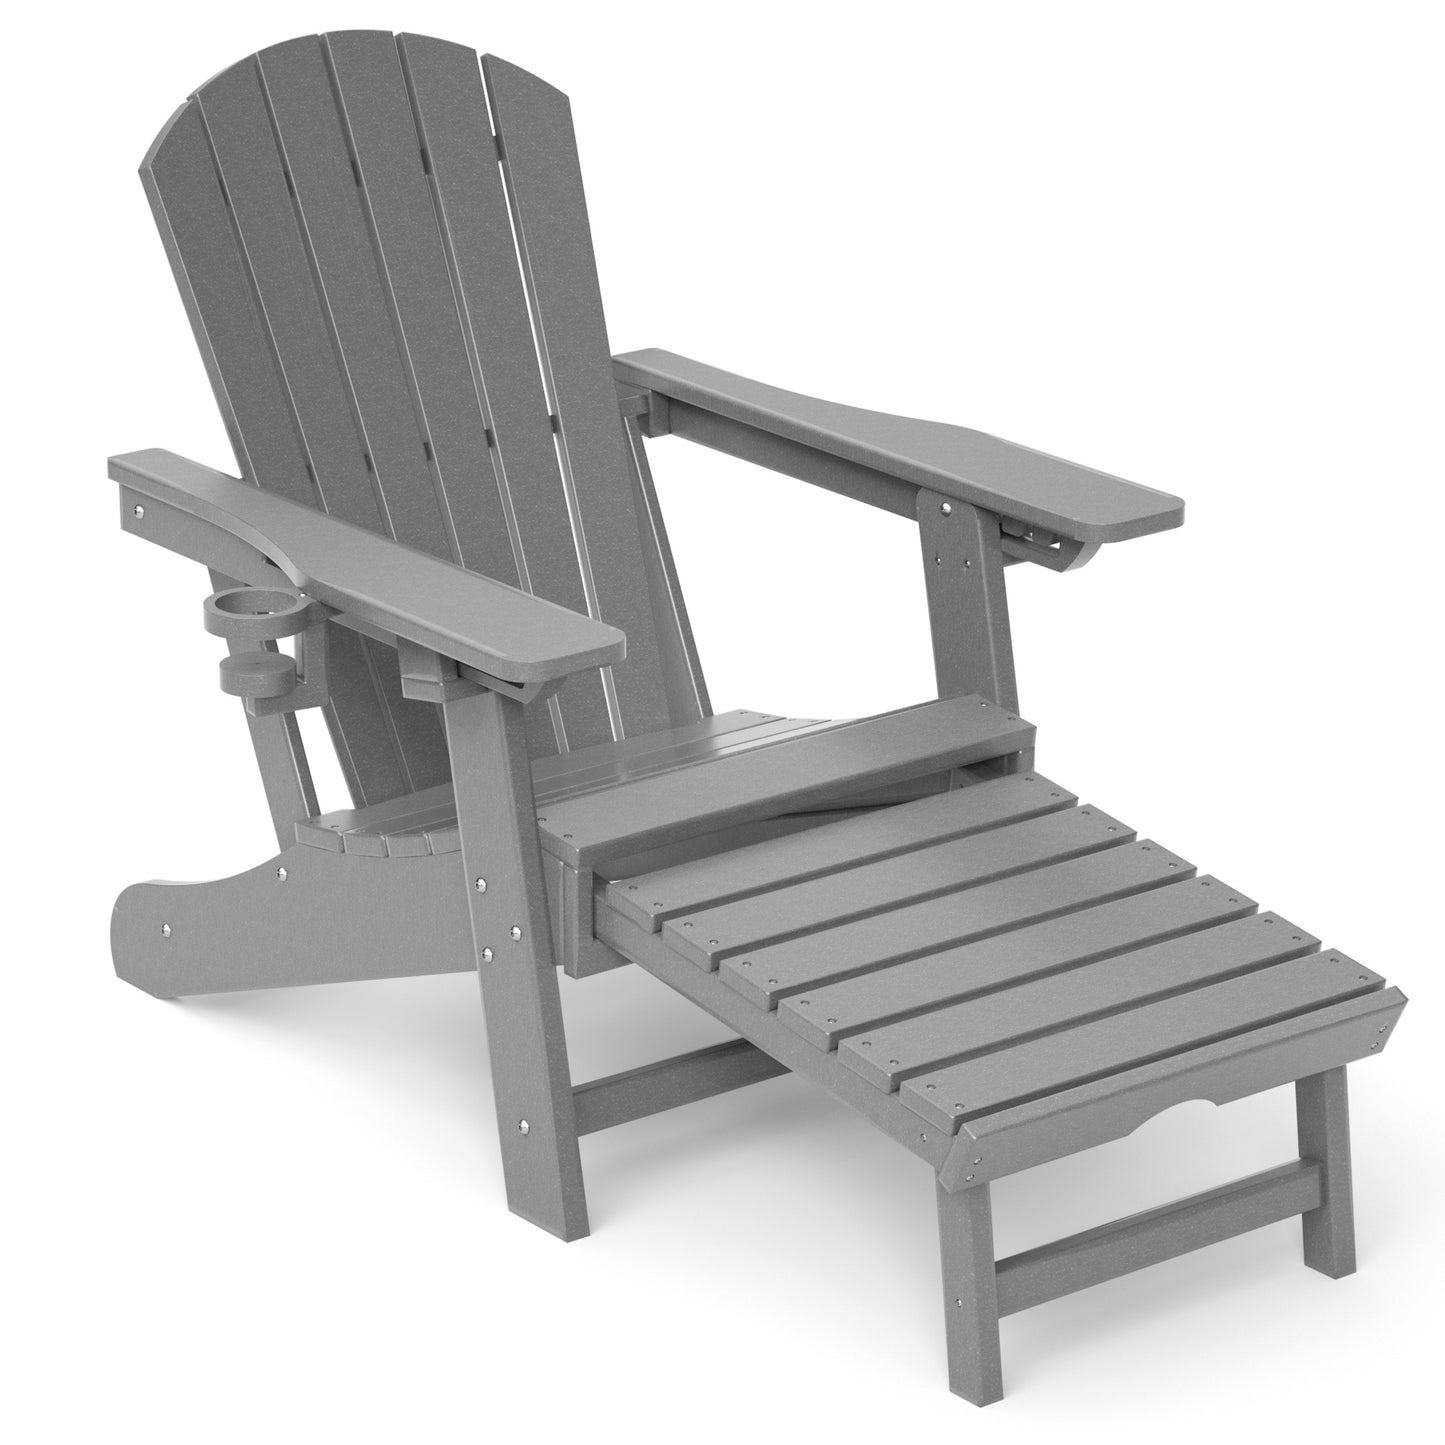 Adirondack Lawn Outdoor Fire Pit Chairs